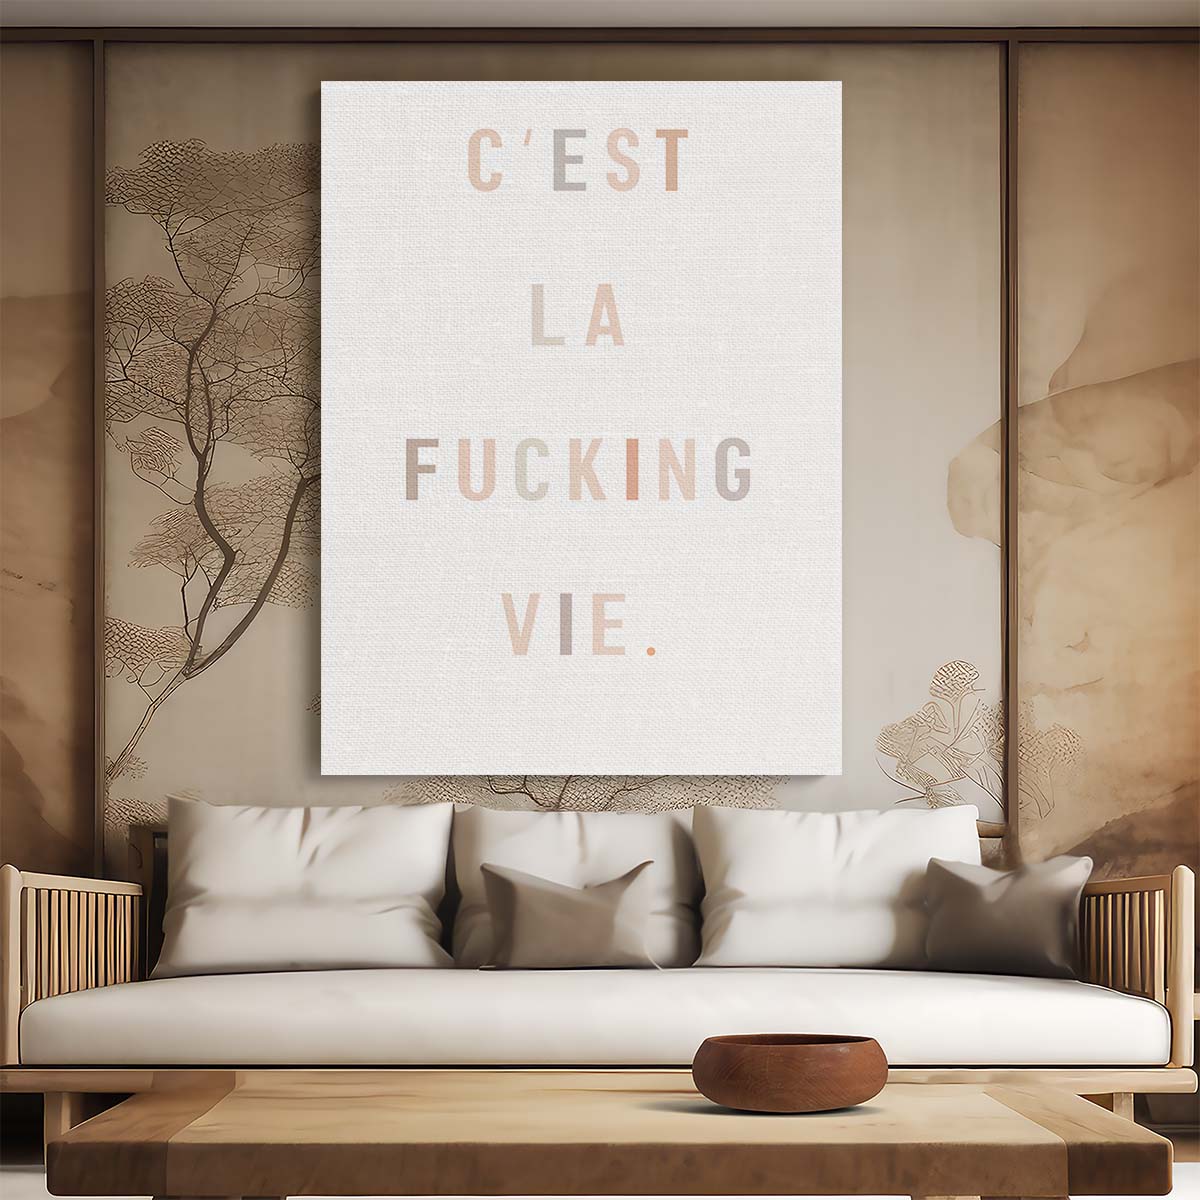 French Quote Illustration 'C'est La Vie' in Beige on Bright Background by Luxuriance Designs, made in USA